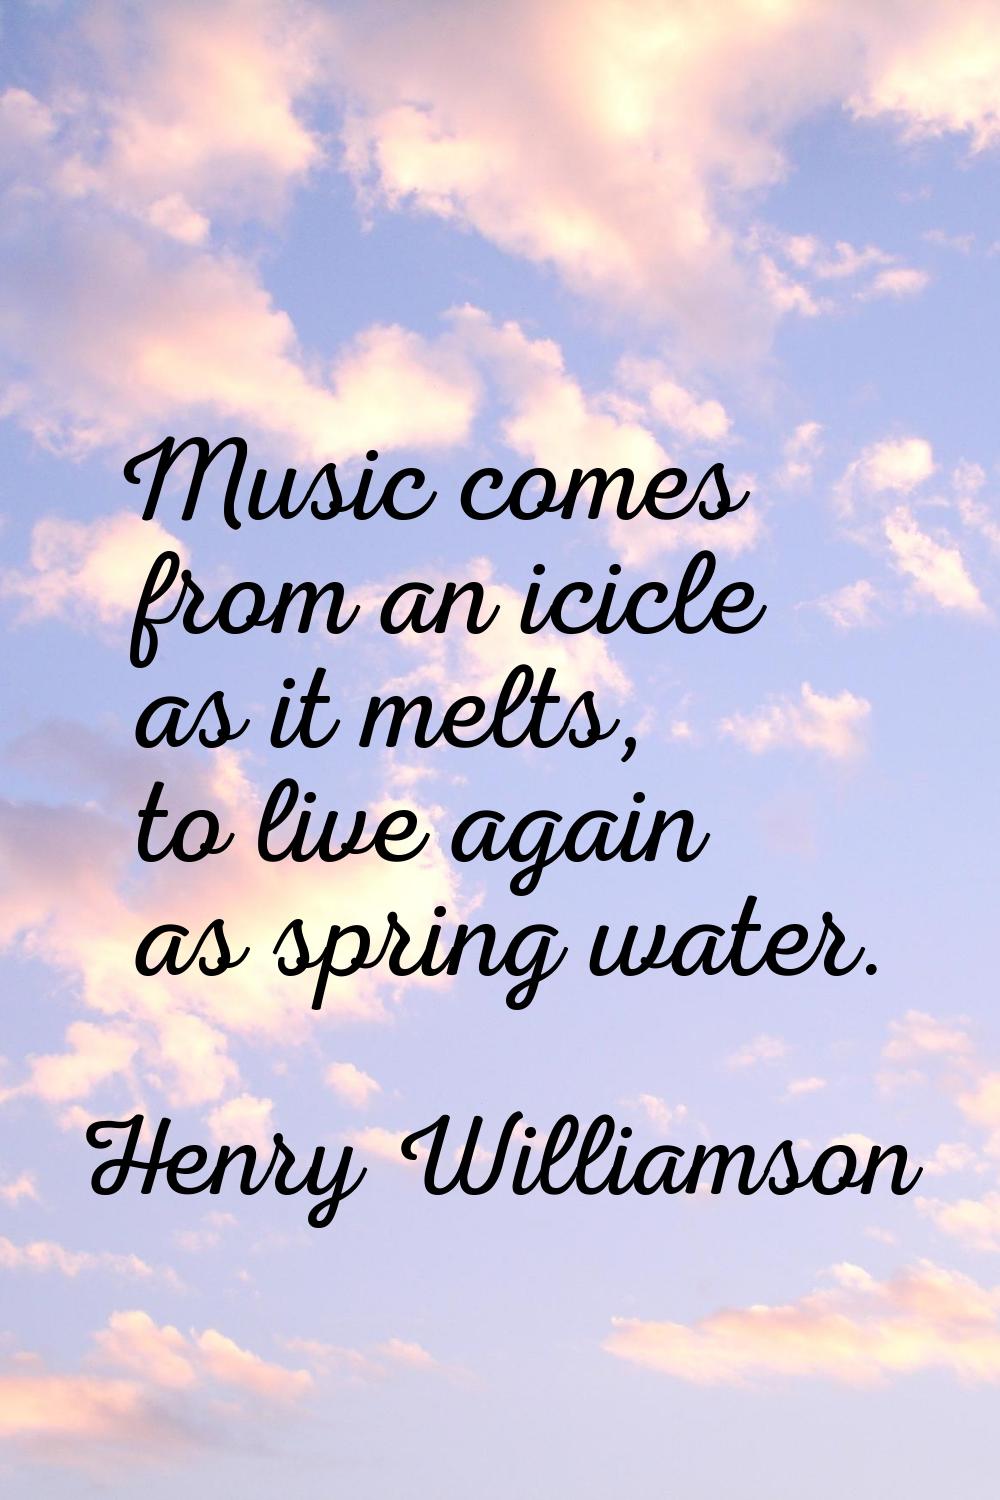 Music comes from an icicle as it melts, to live again as spring water.